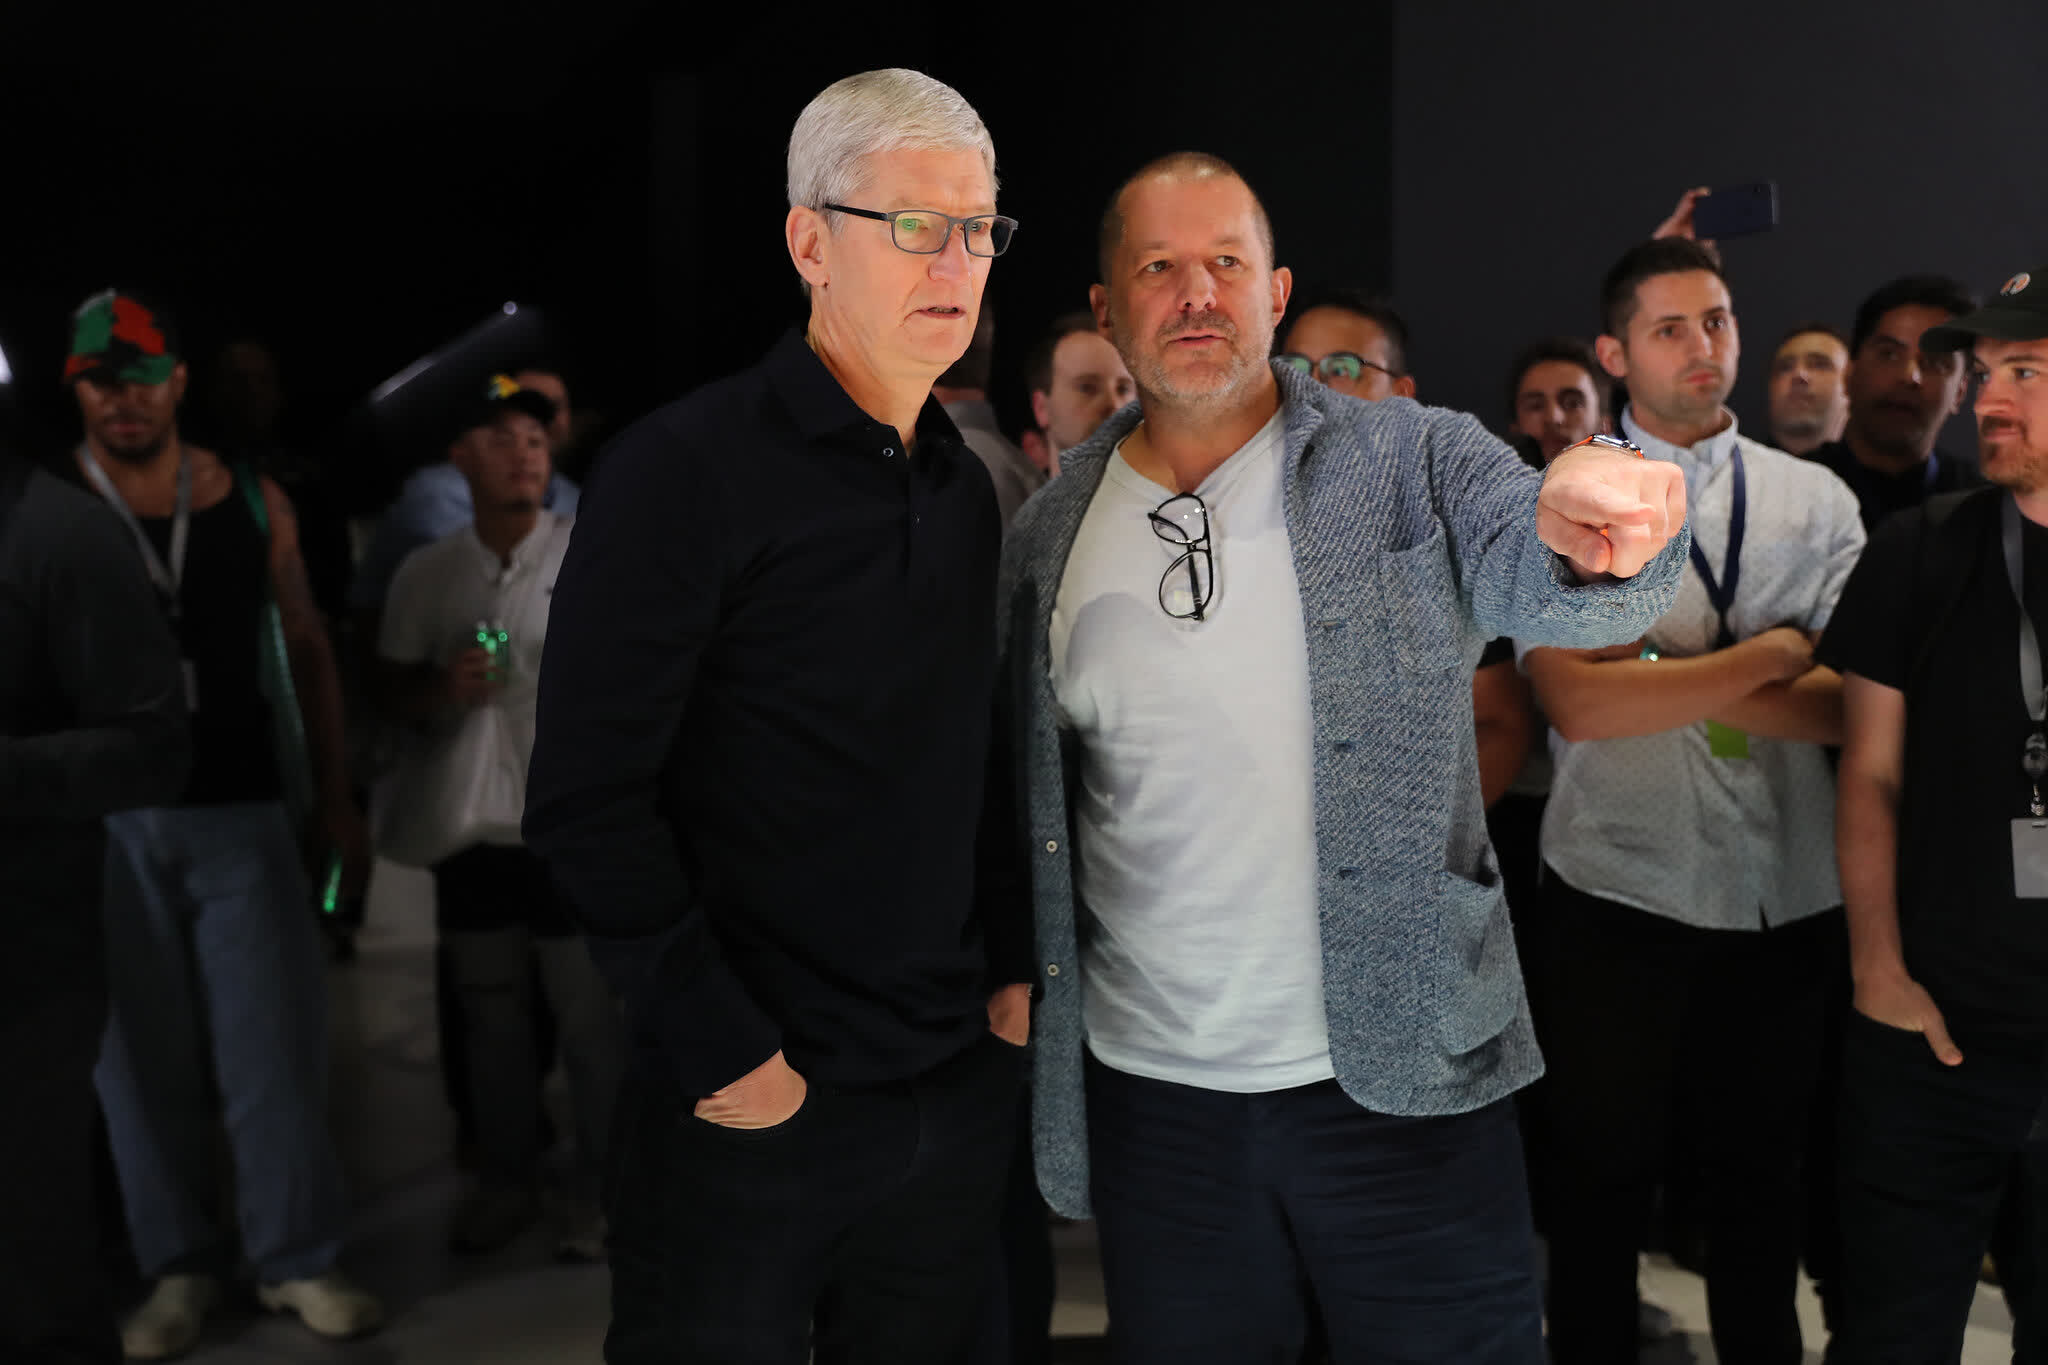 Apple is parting ways with Jony Ive and his design firm